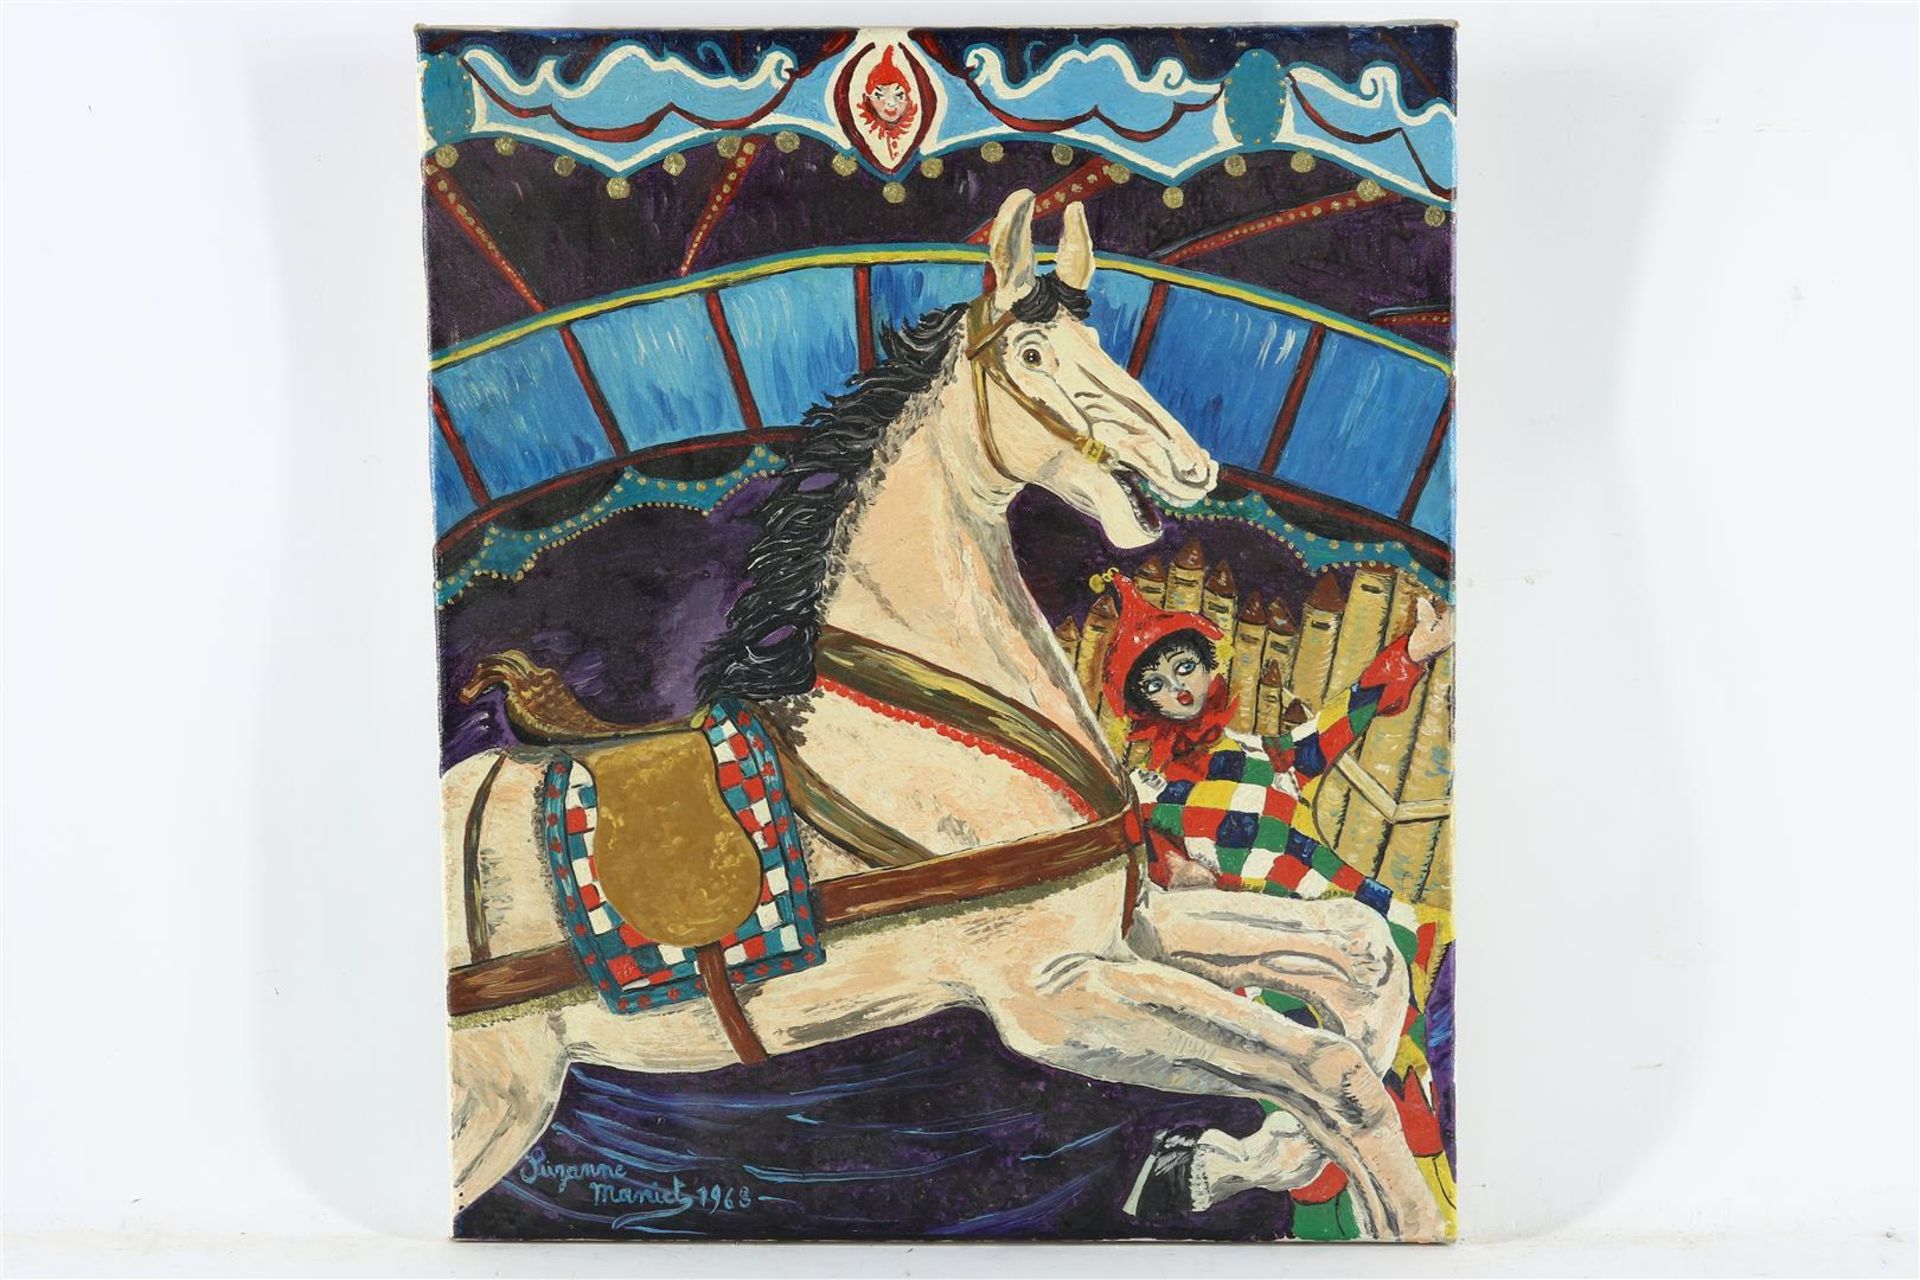 Suzanne Maniet (1911-) Carousel, signed lower left and dated 1968, canvas 60 x 50 cm. - Image 2 of 3